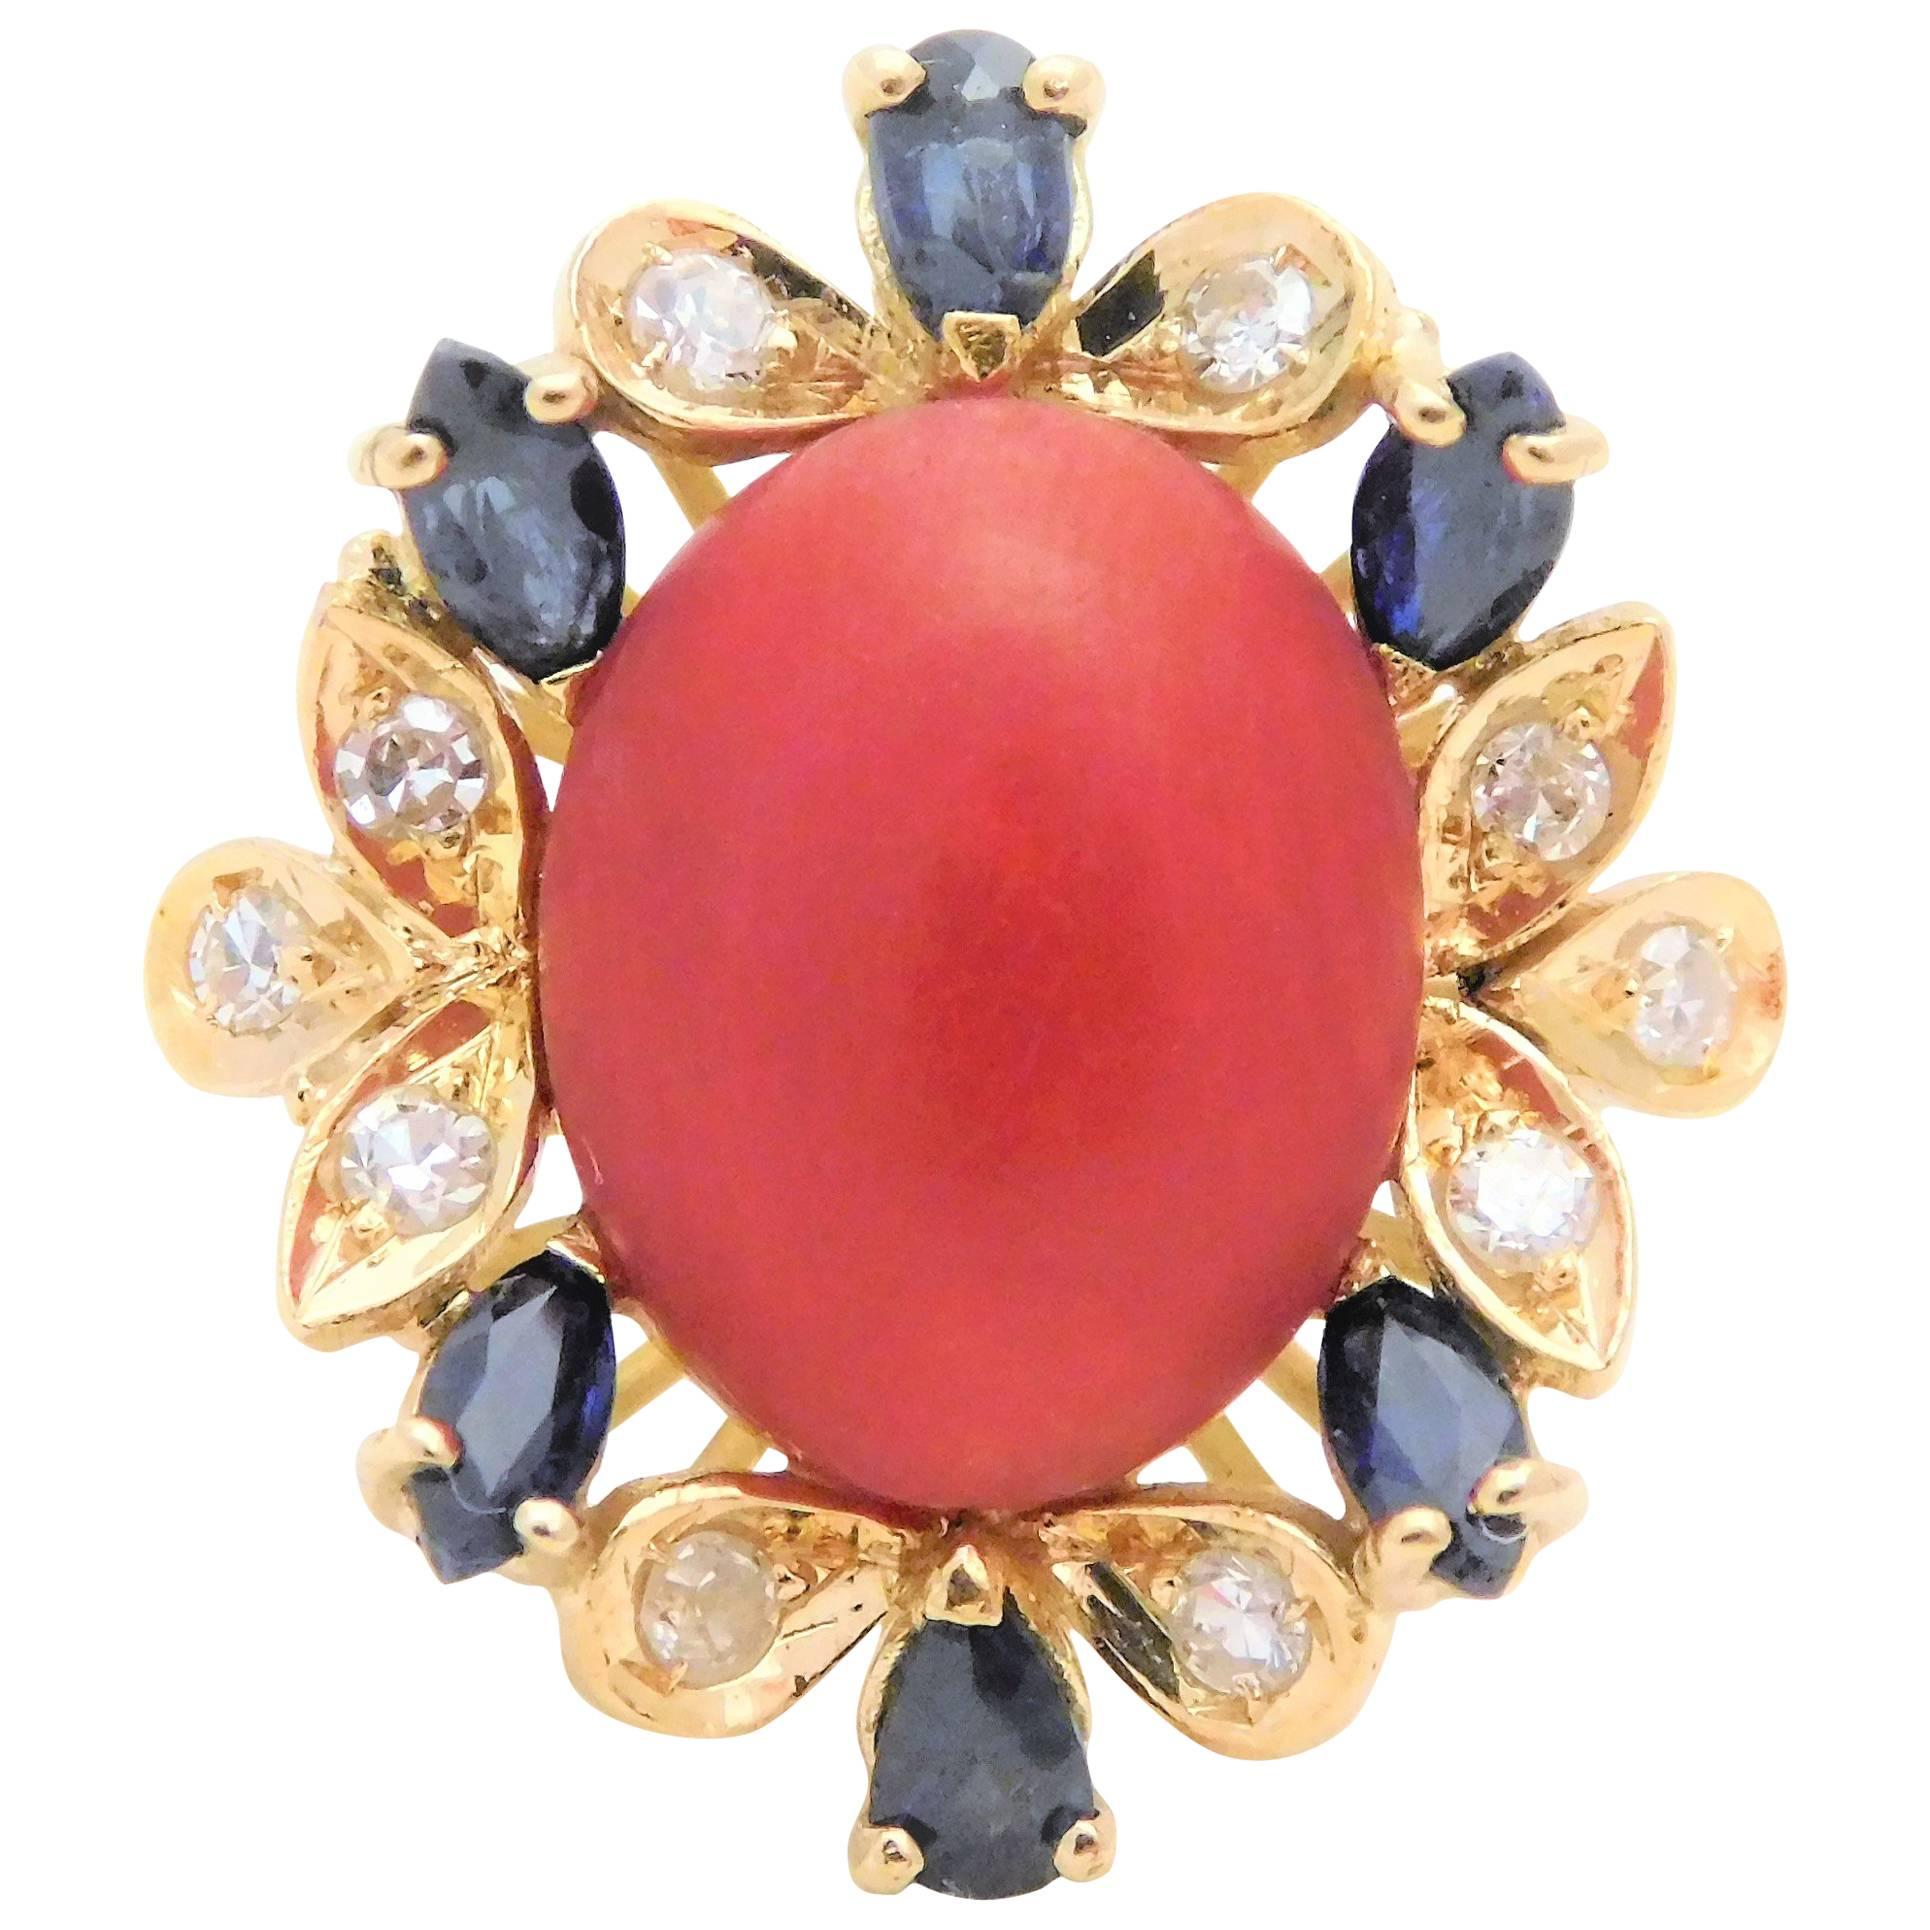 Coral Cabochon, Sapphire, and Spinel Cocktail Ring